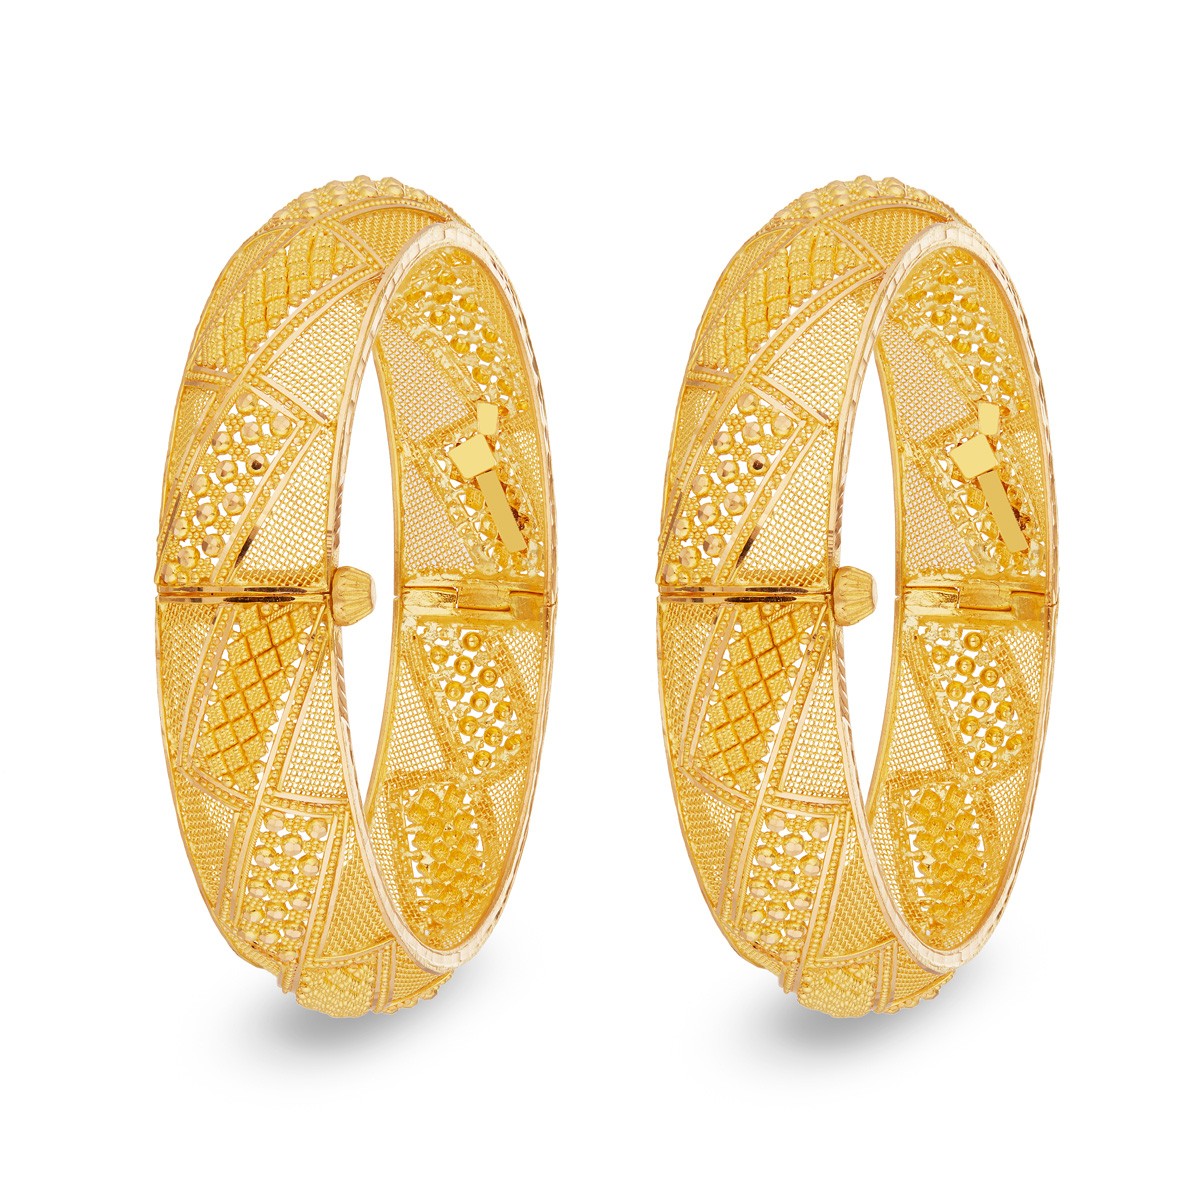 For Special Occasions!! - Bangles - Gold